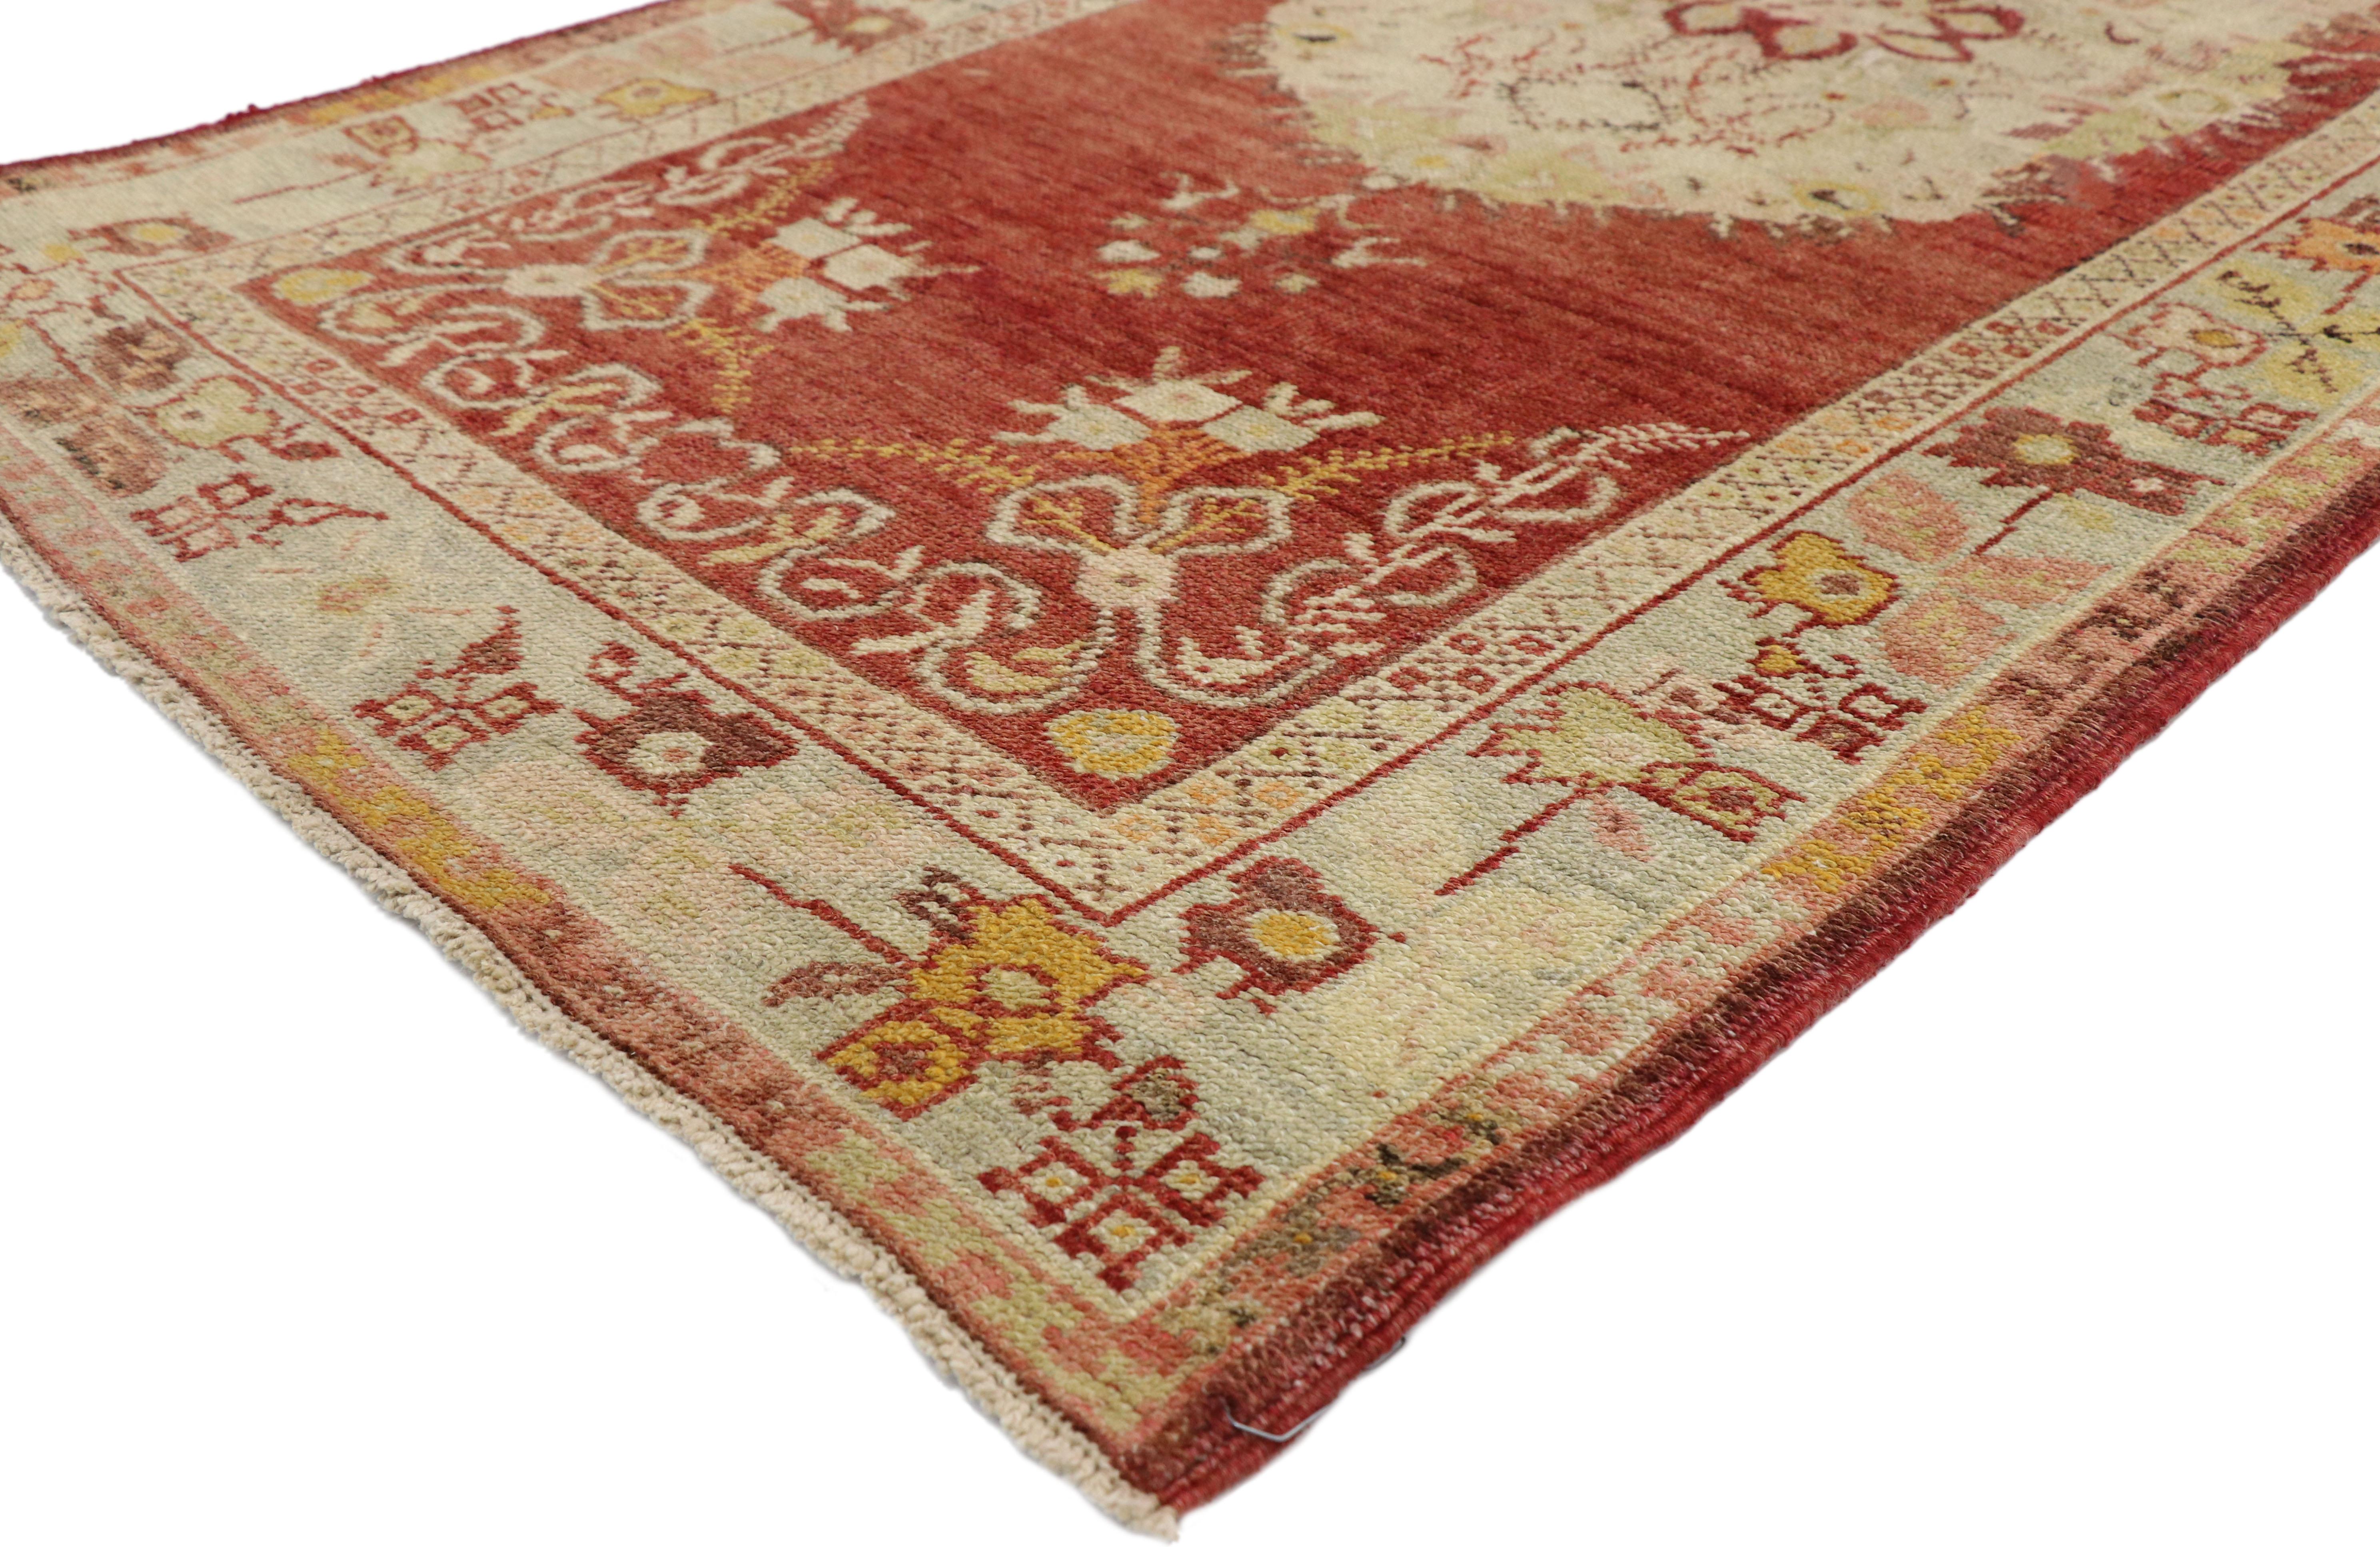 51043 Vintage Turkish Oushak Hallway Runner with Rustic French Rococo Style. This hand-knotted wool vintage Turkish Oushak runner features three round central medallions filled with stylized geometric flowers to the centre. The floating medallions